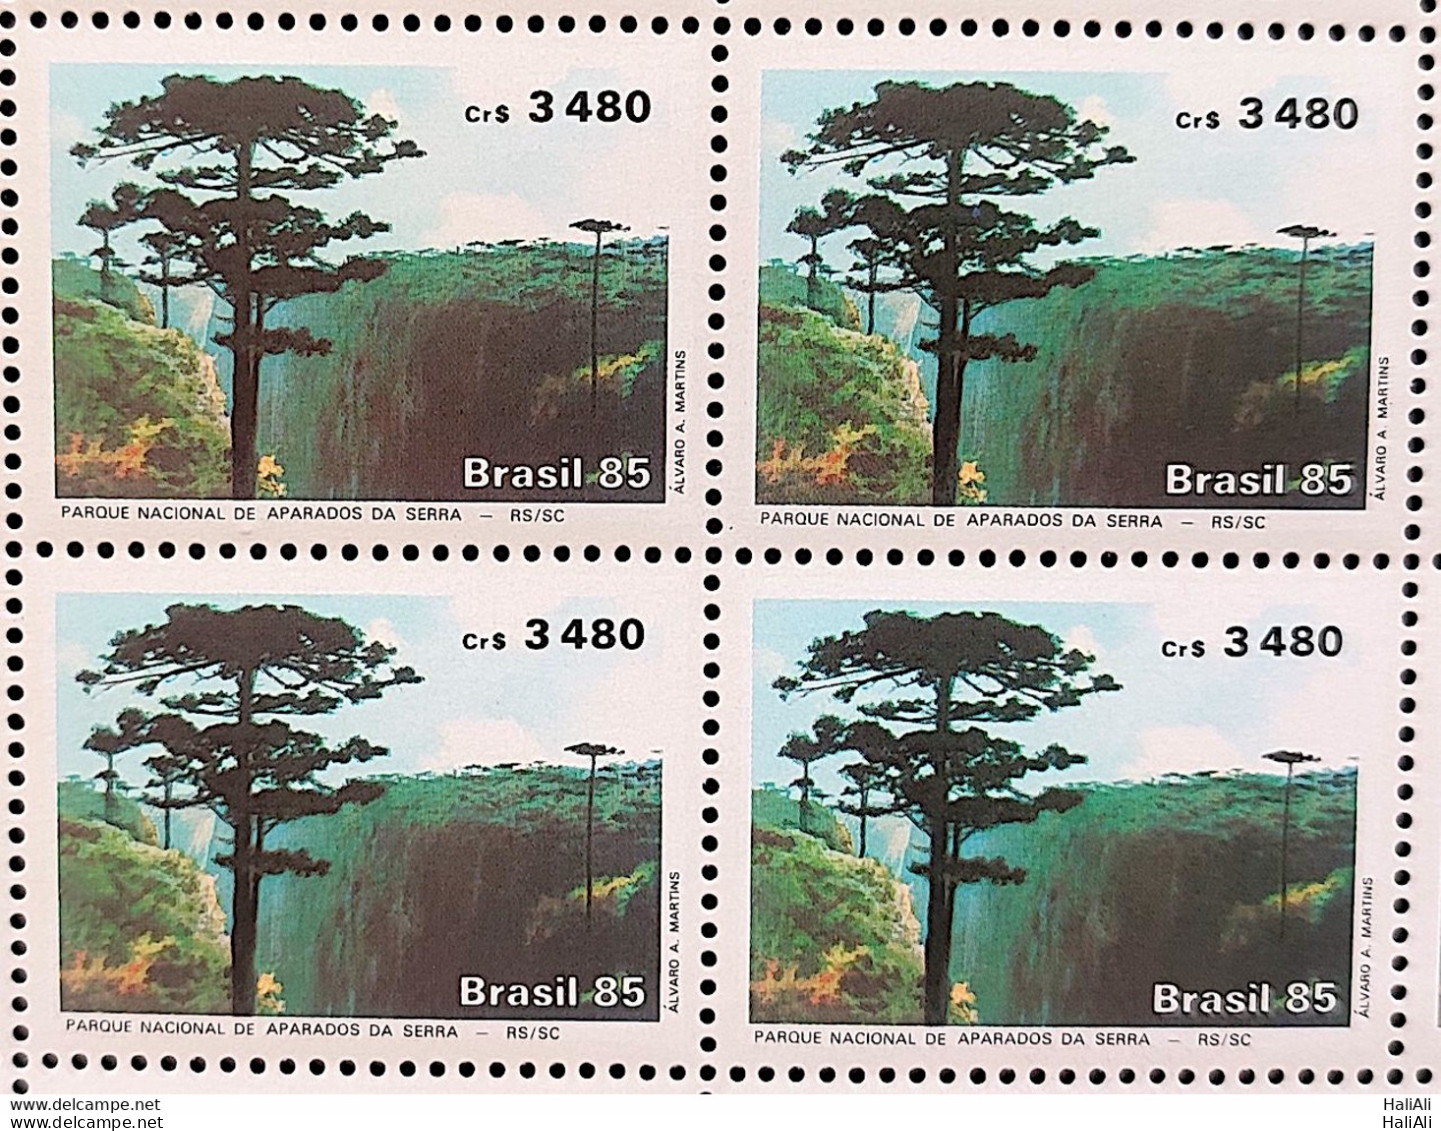 C 1484 Brazil Stamp Trimmings Of The Sierra Landscape Environment 1985 Block Of 4 - Unused Stamps